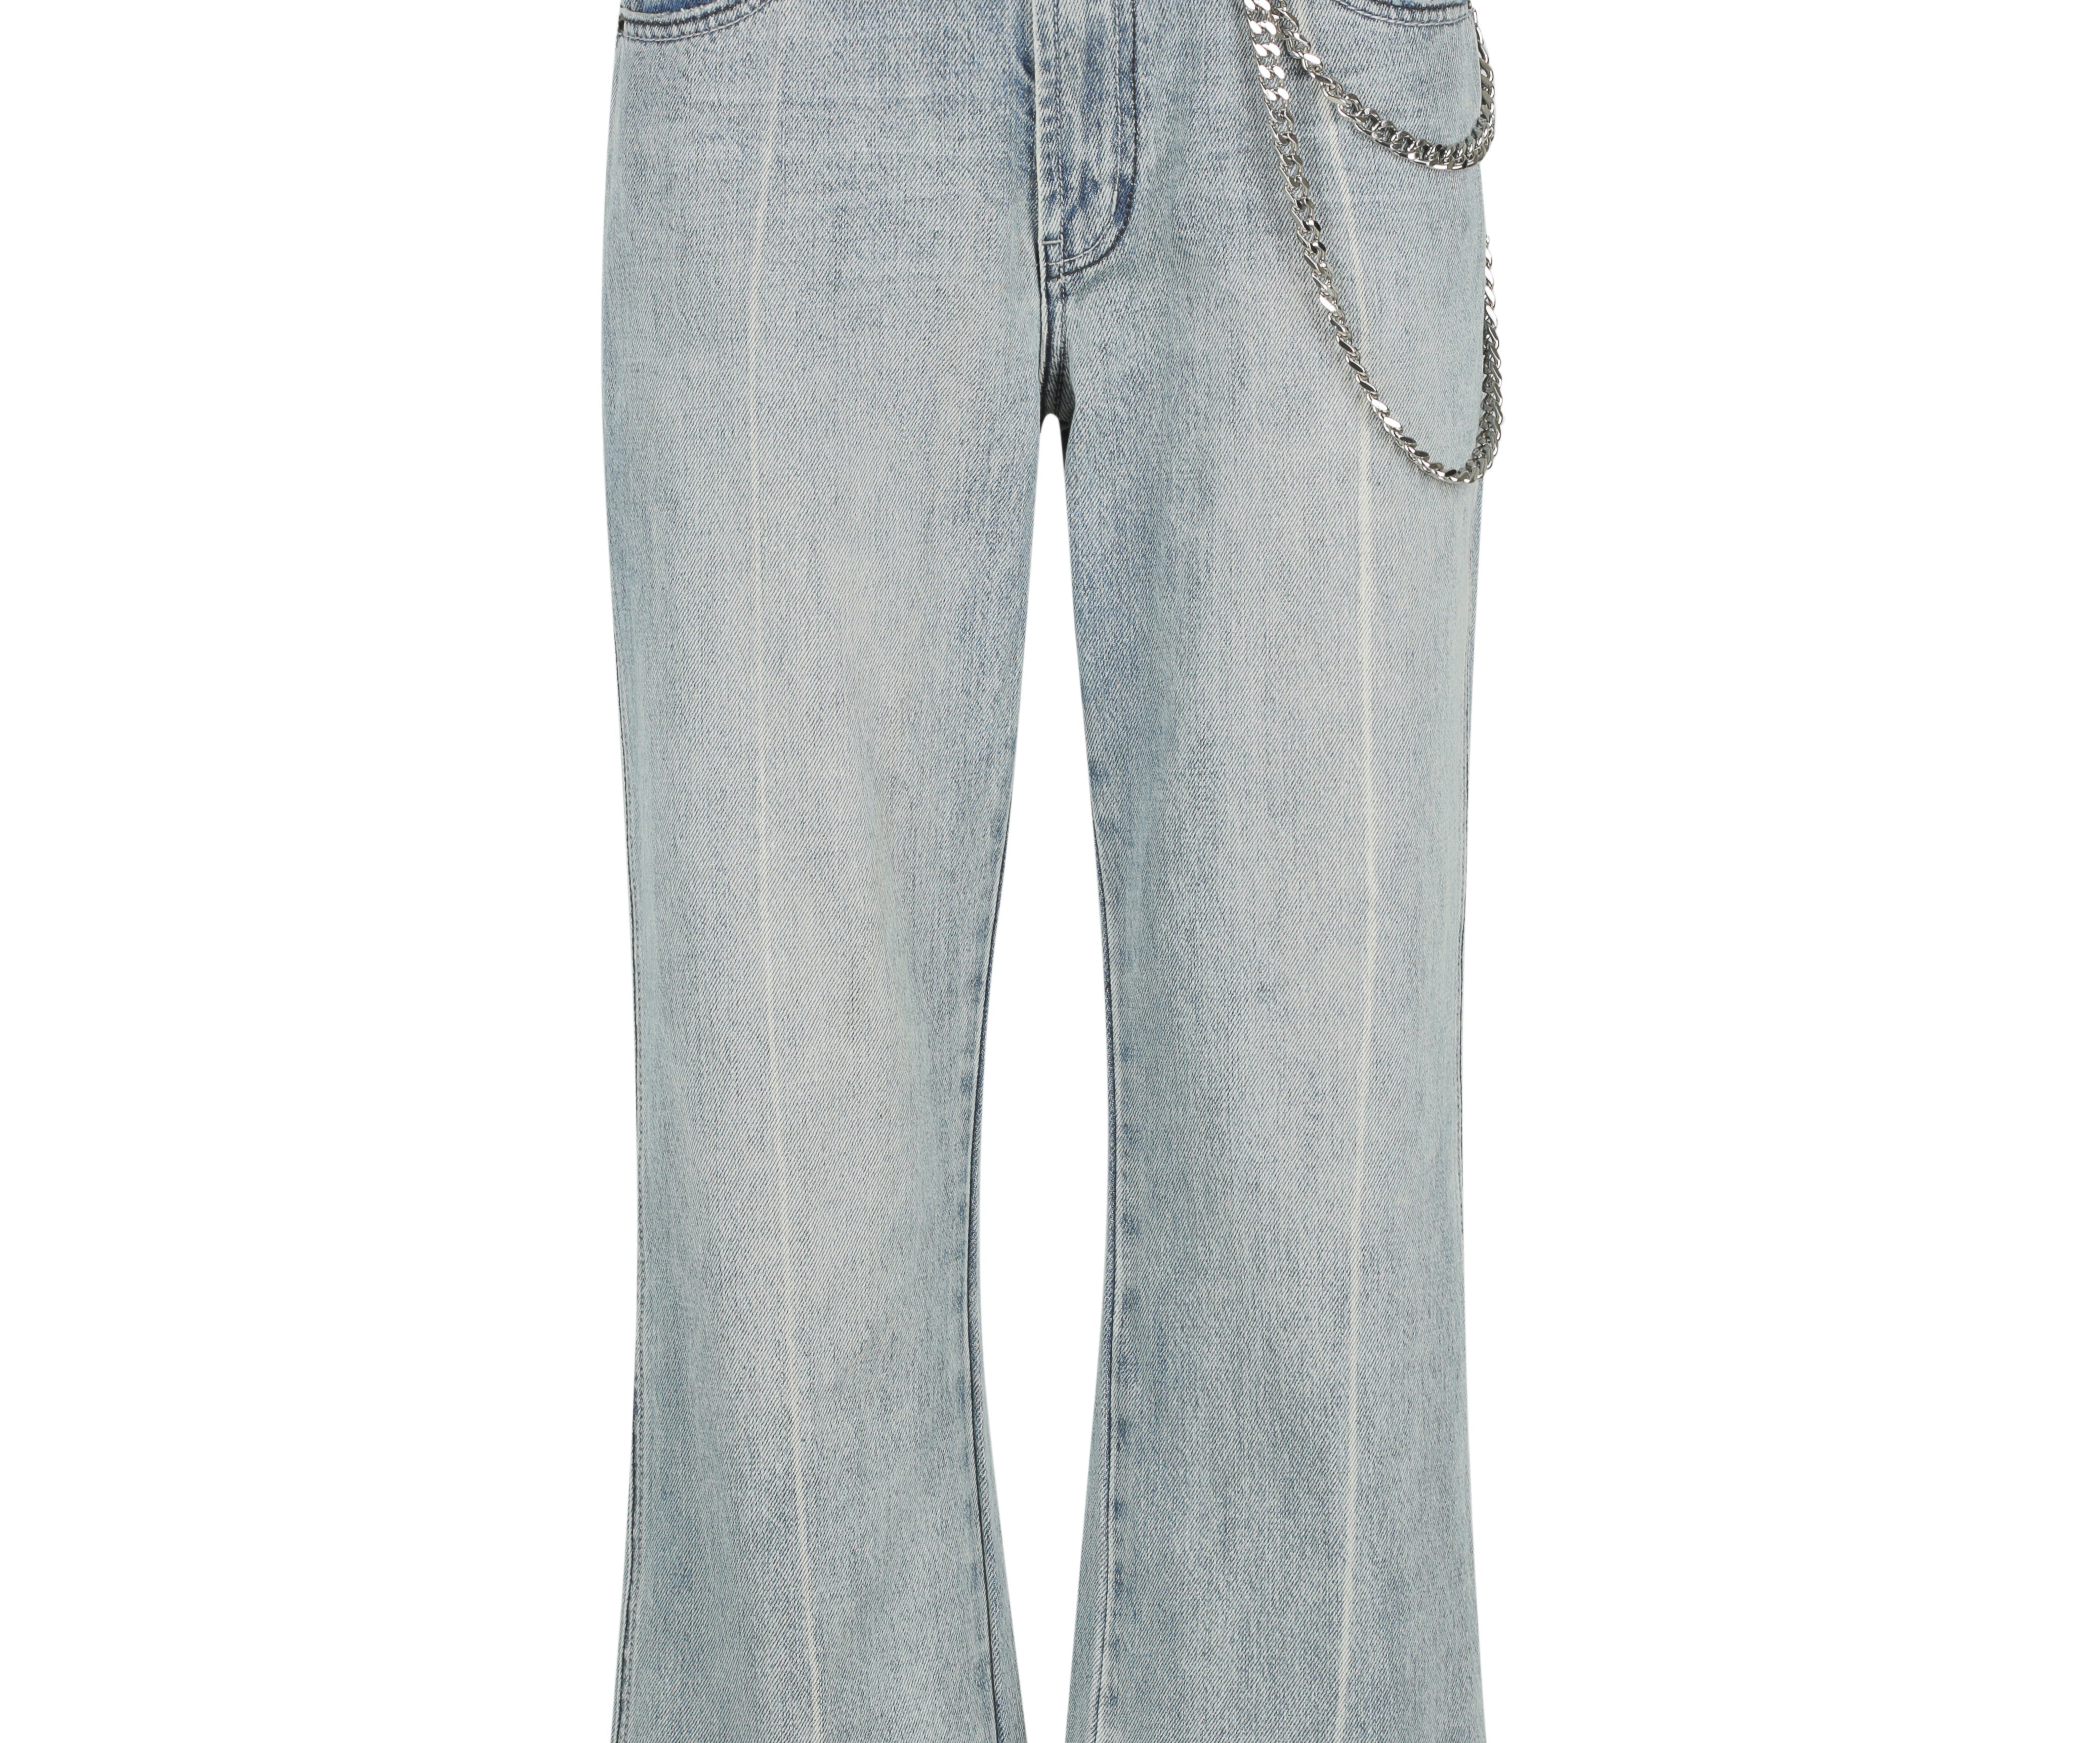 SALTY DOG CHAINED NOMAD MID WAIST VINTAGE FIT JEANS